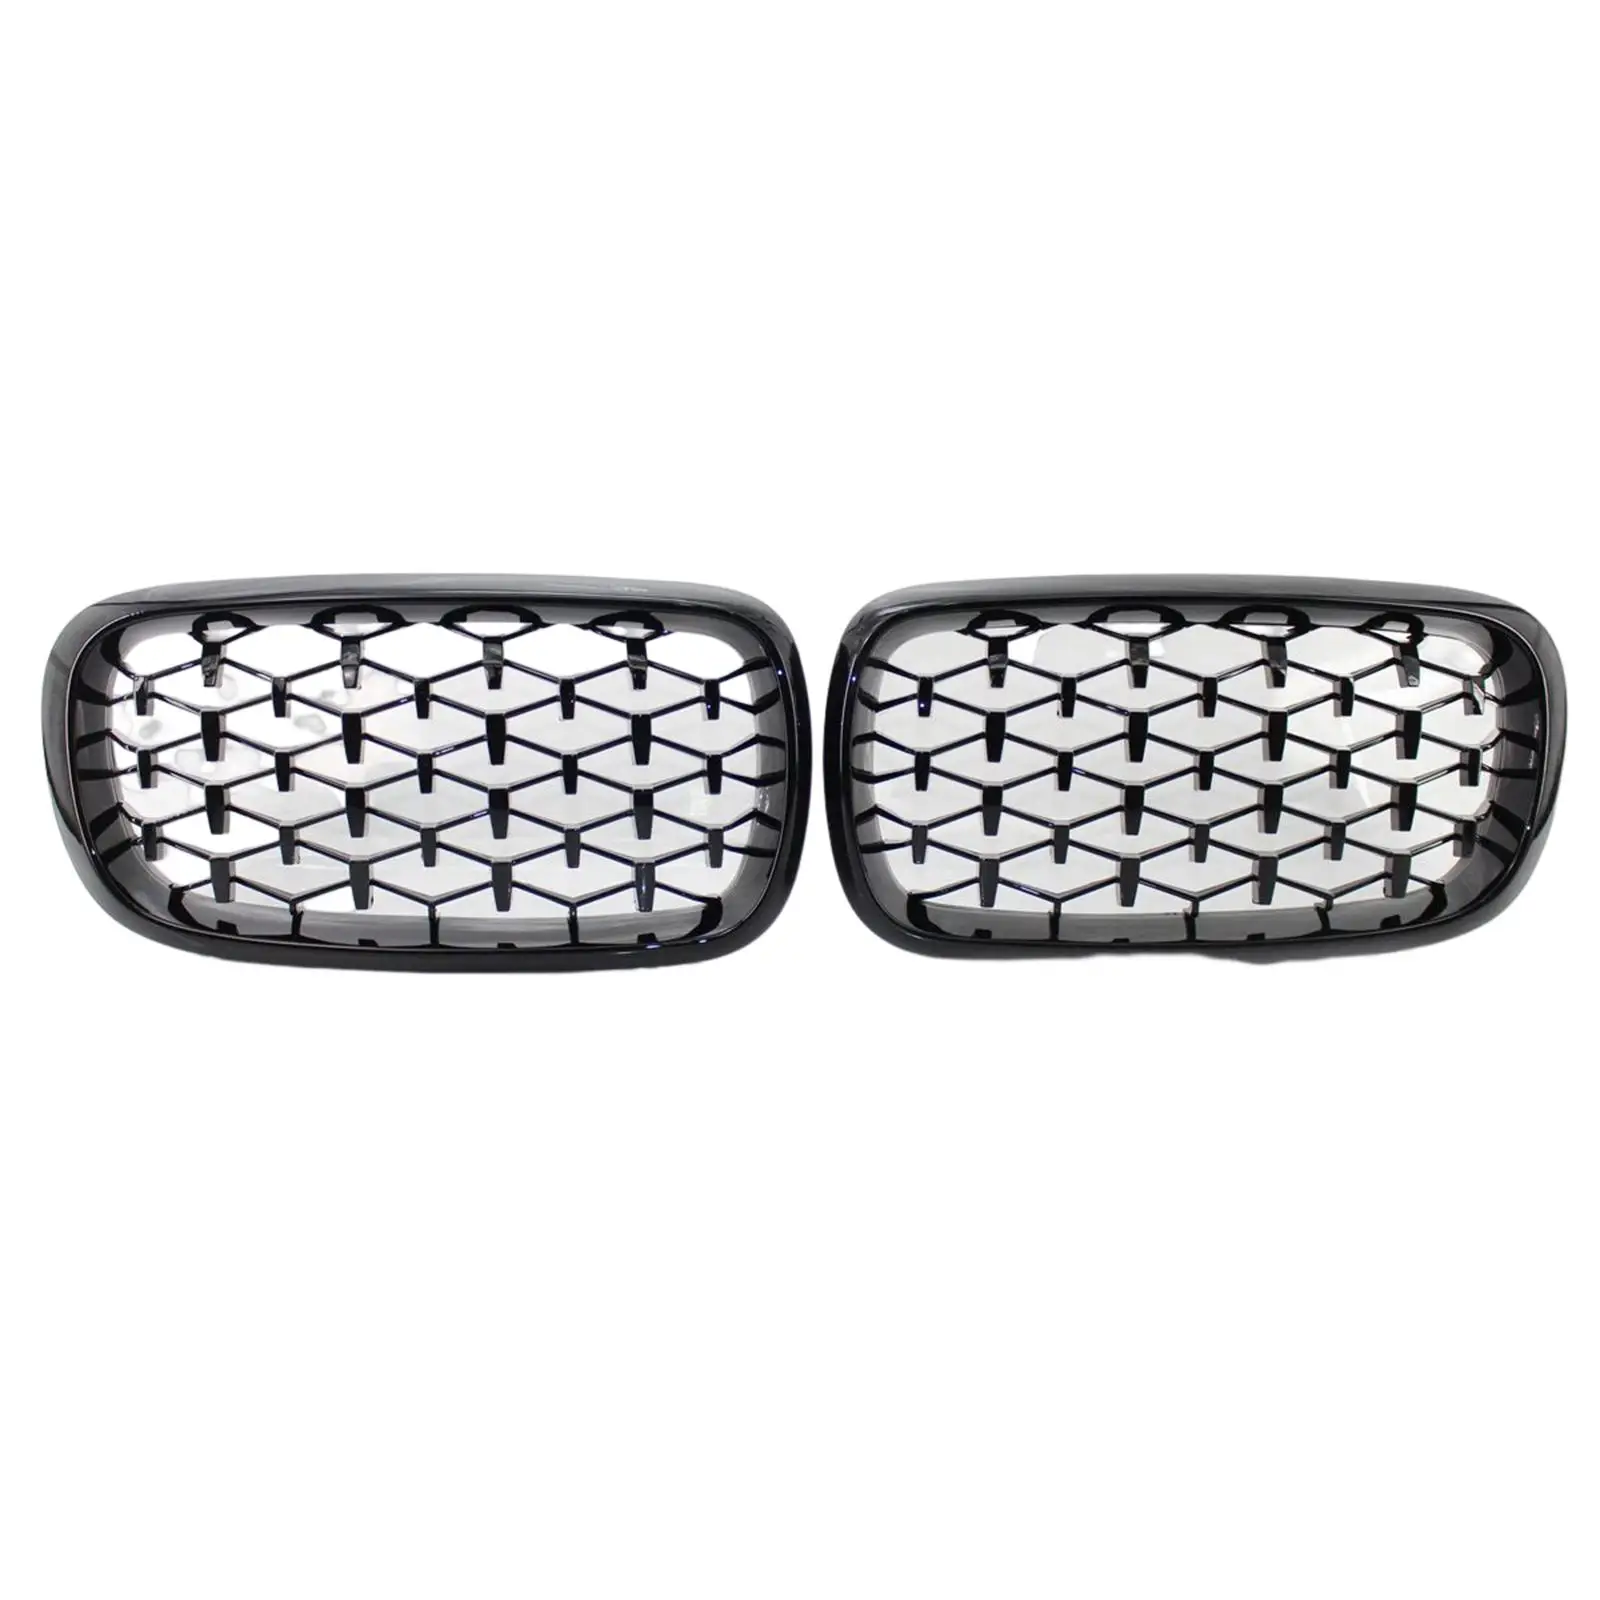 Front Grill Grille 51137316061 for BMW x5 F15 2014-2016 Replaces Car